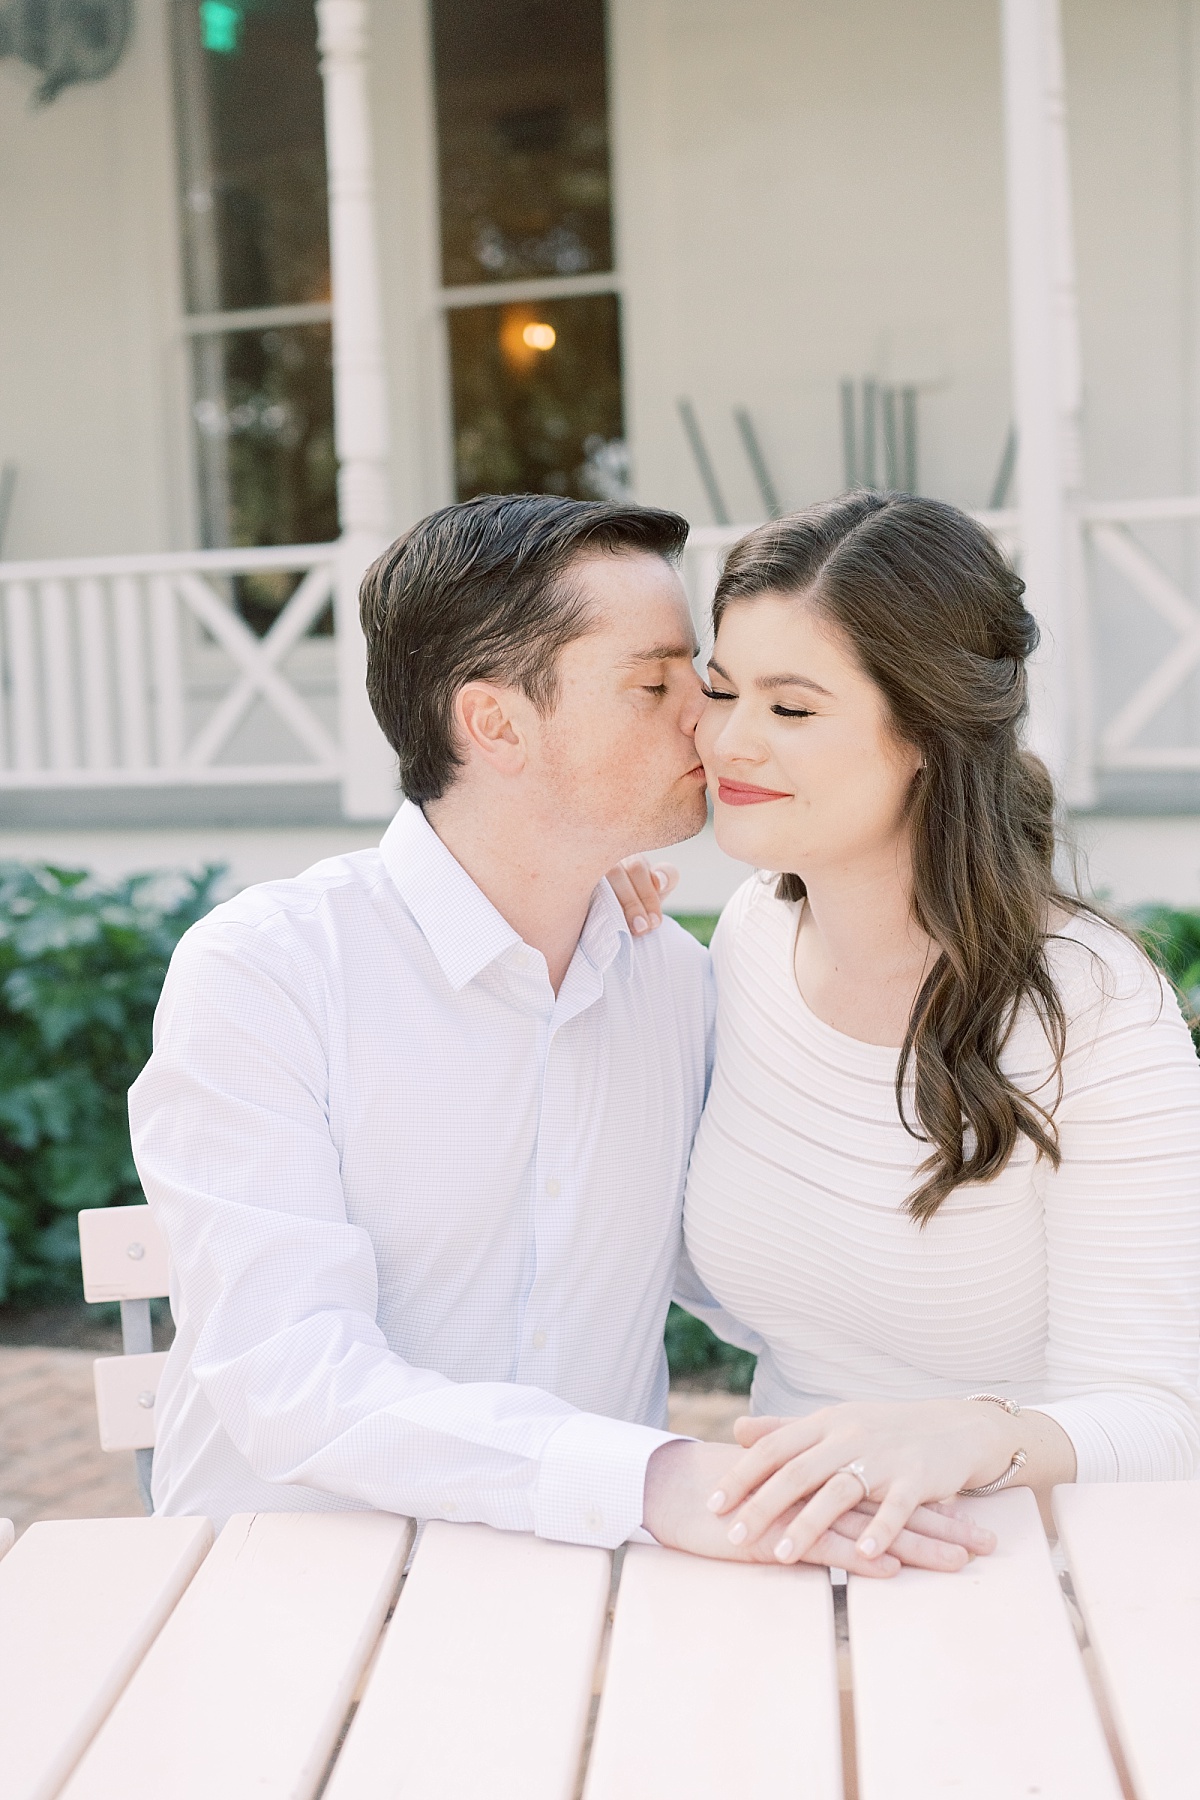 Engagement Session at Mattie's, A beautiful woman in a white dress smiles as her handsome fiance kisses her cheek in front of a southern porch.